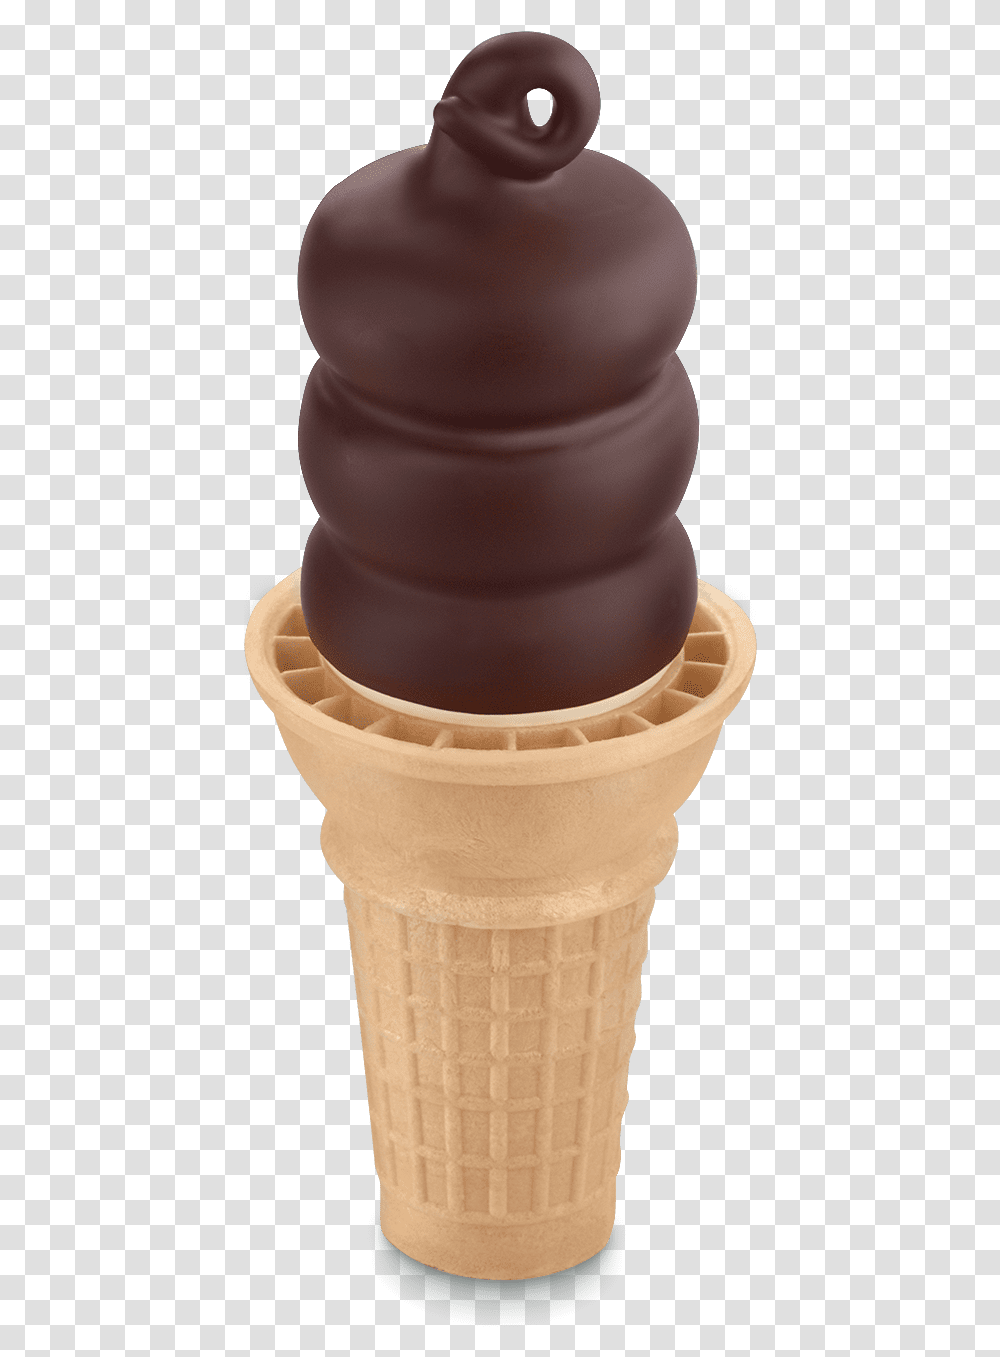 Chocolate Dipped Cone Dairy Queen Menu Solid, Sweets, Food, Confectionery, Dessert Transparent Png